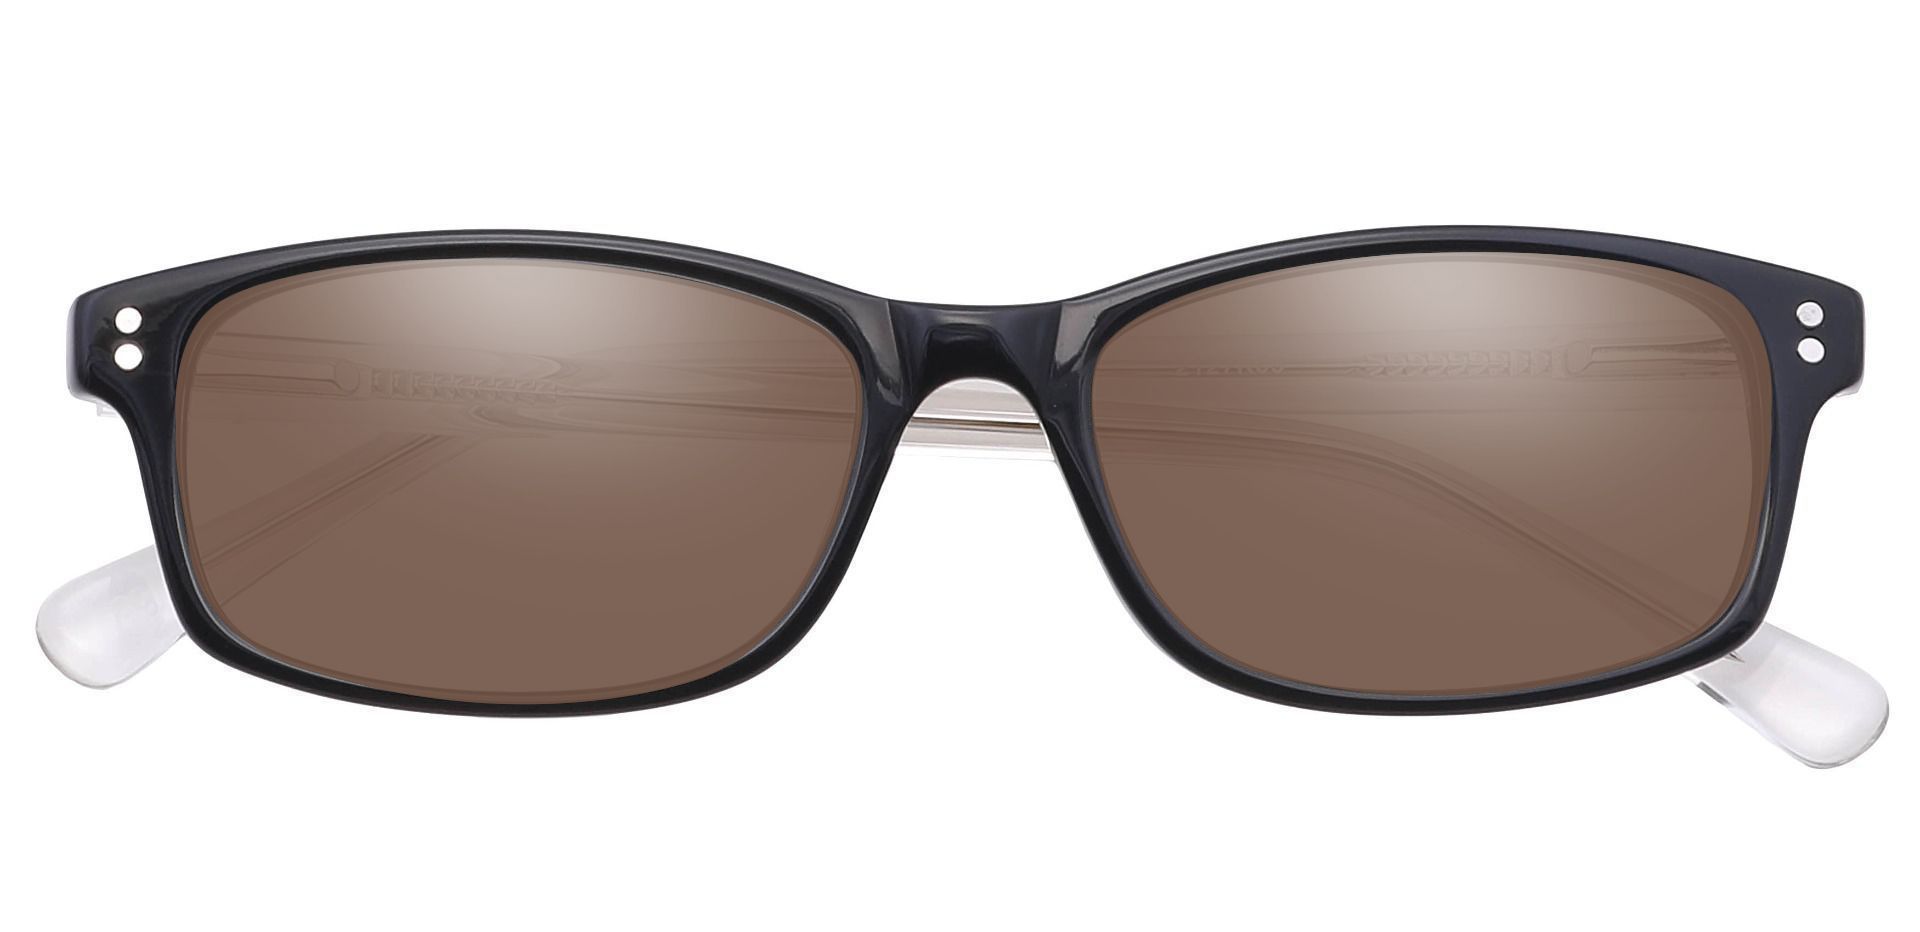 Olmstead Rectangle Non-Rx Sunglasses - Black Frame With Brown Lenses